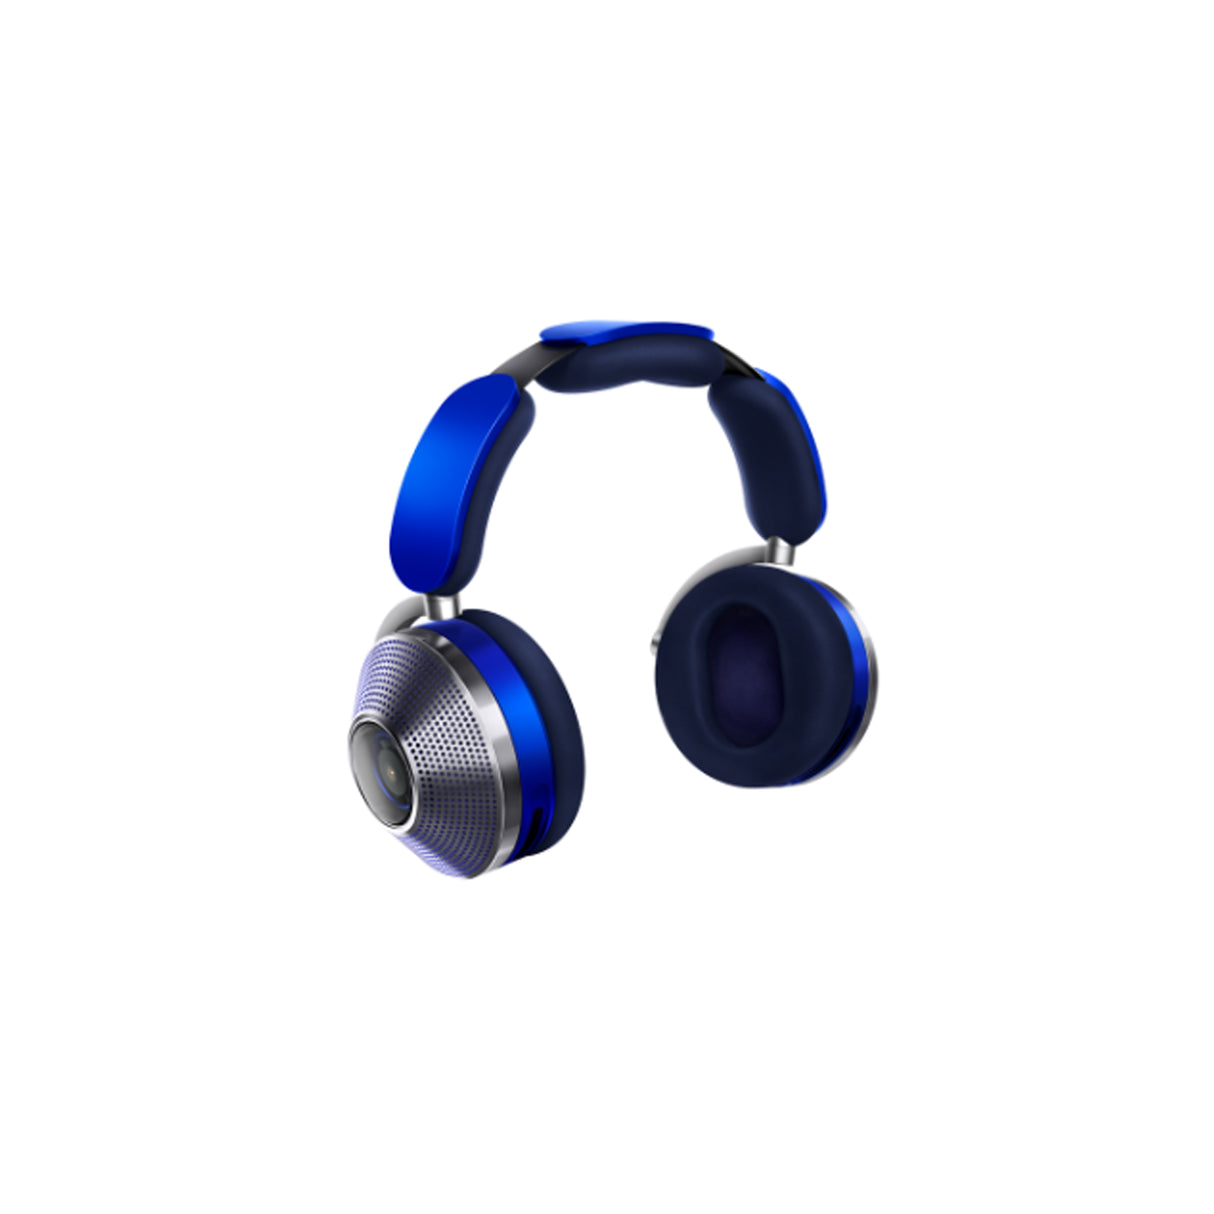 Dyson Headphone Zone WP01 Absolute noise-cancelling headphones (Ultra Blue/Prussian Blue)